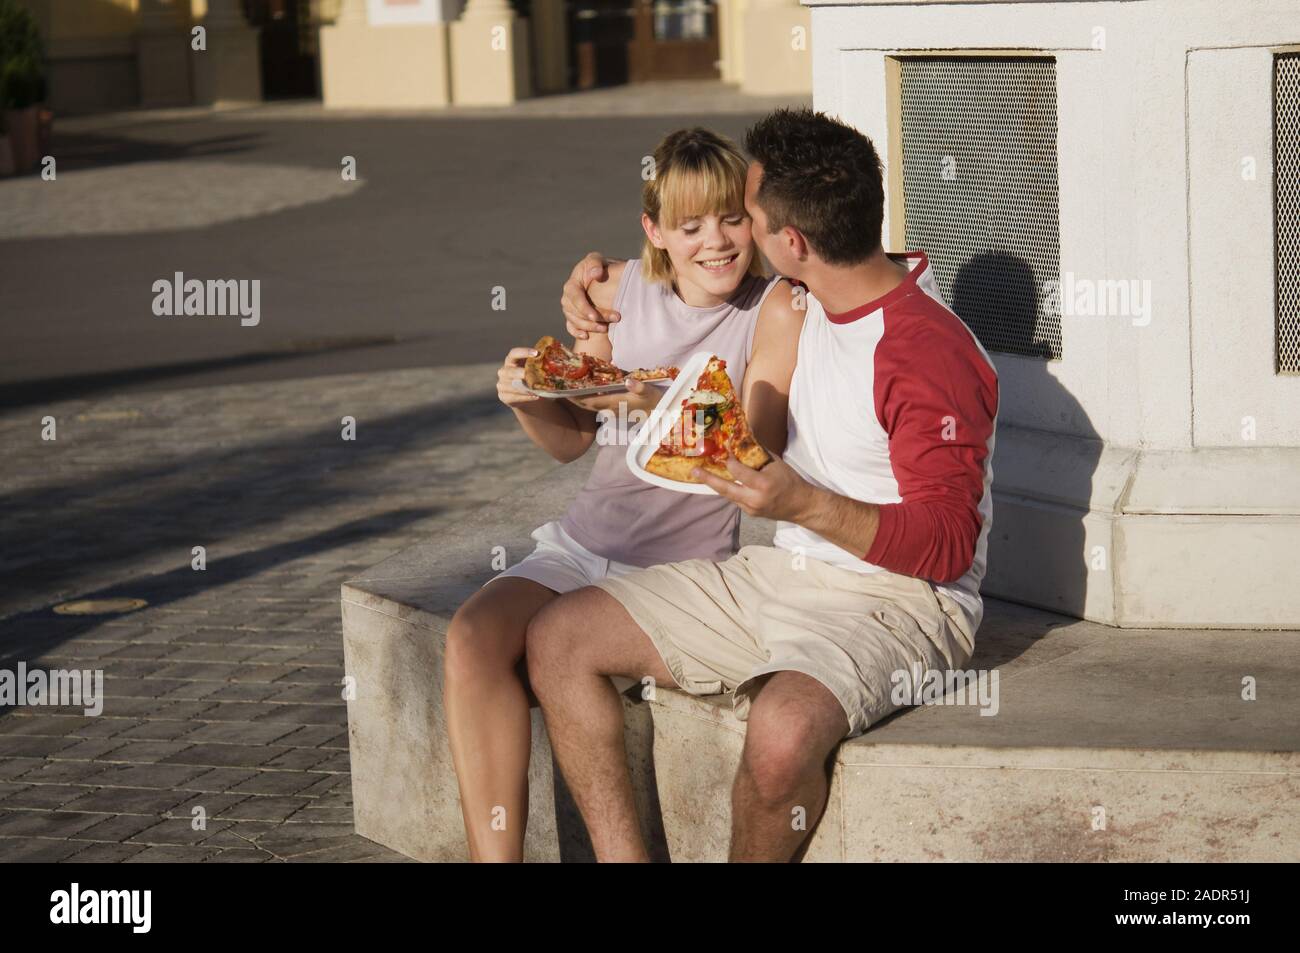 Junges Paar isst eine Pizzaschnitte - Young couple eating pizza outdoors Stock Photo